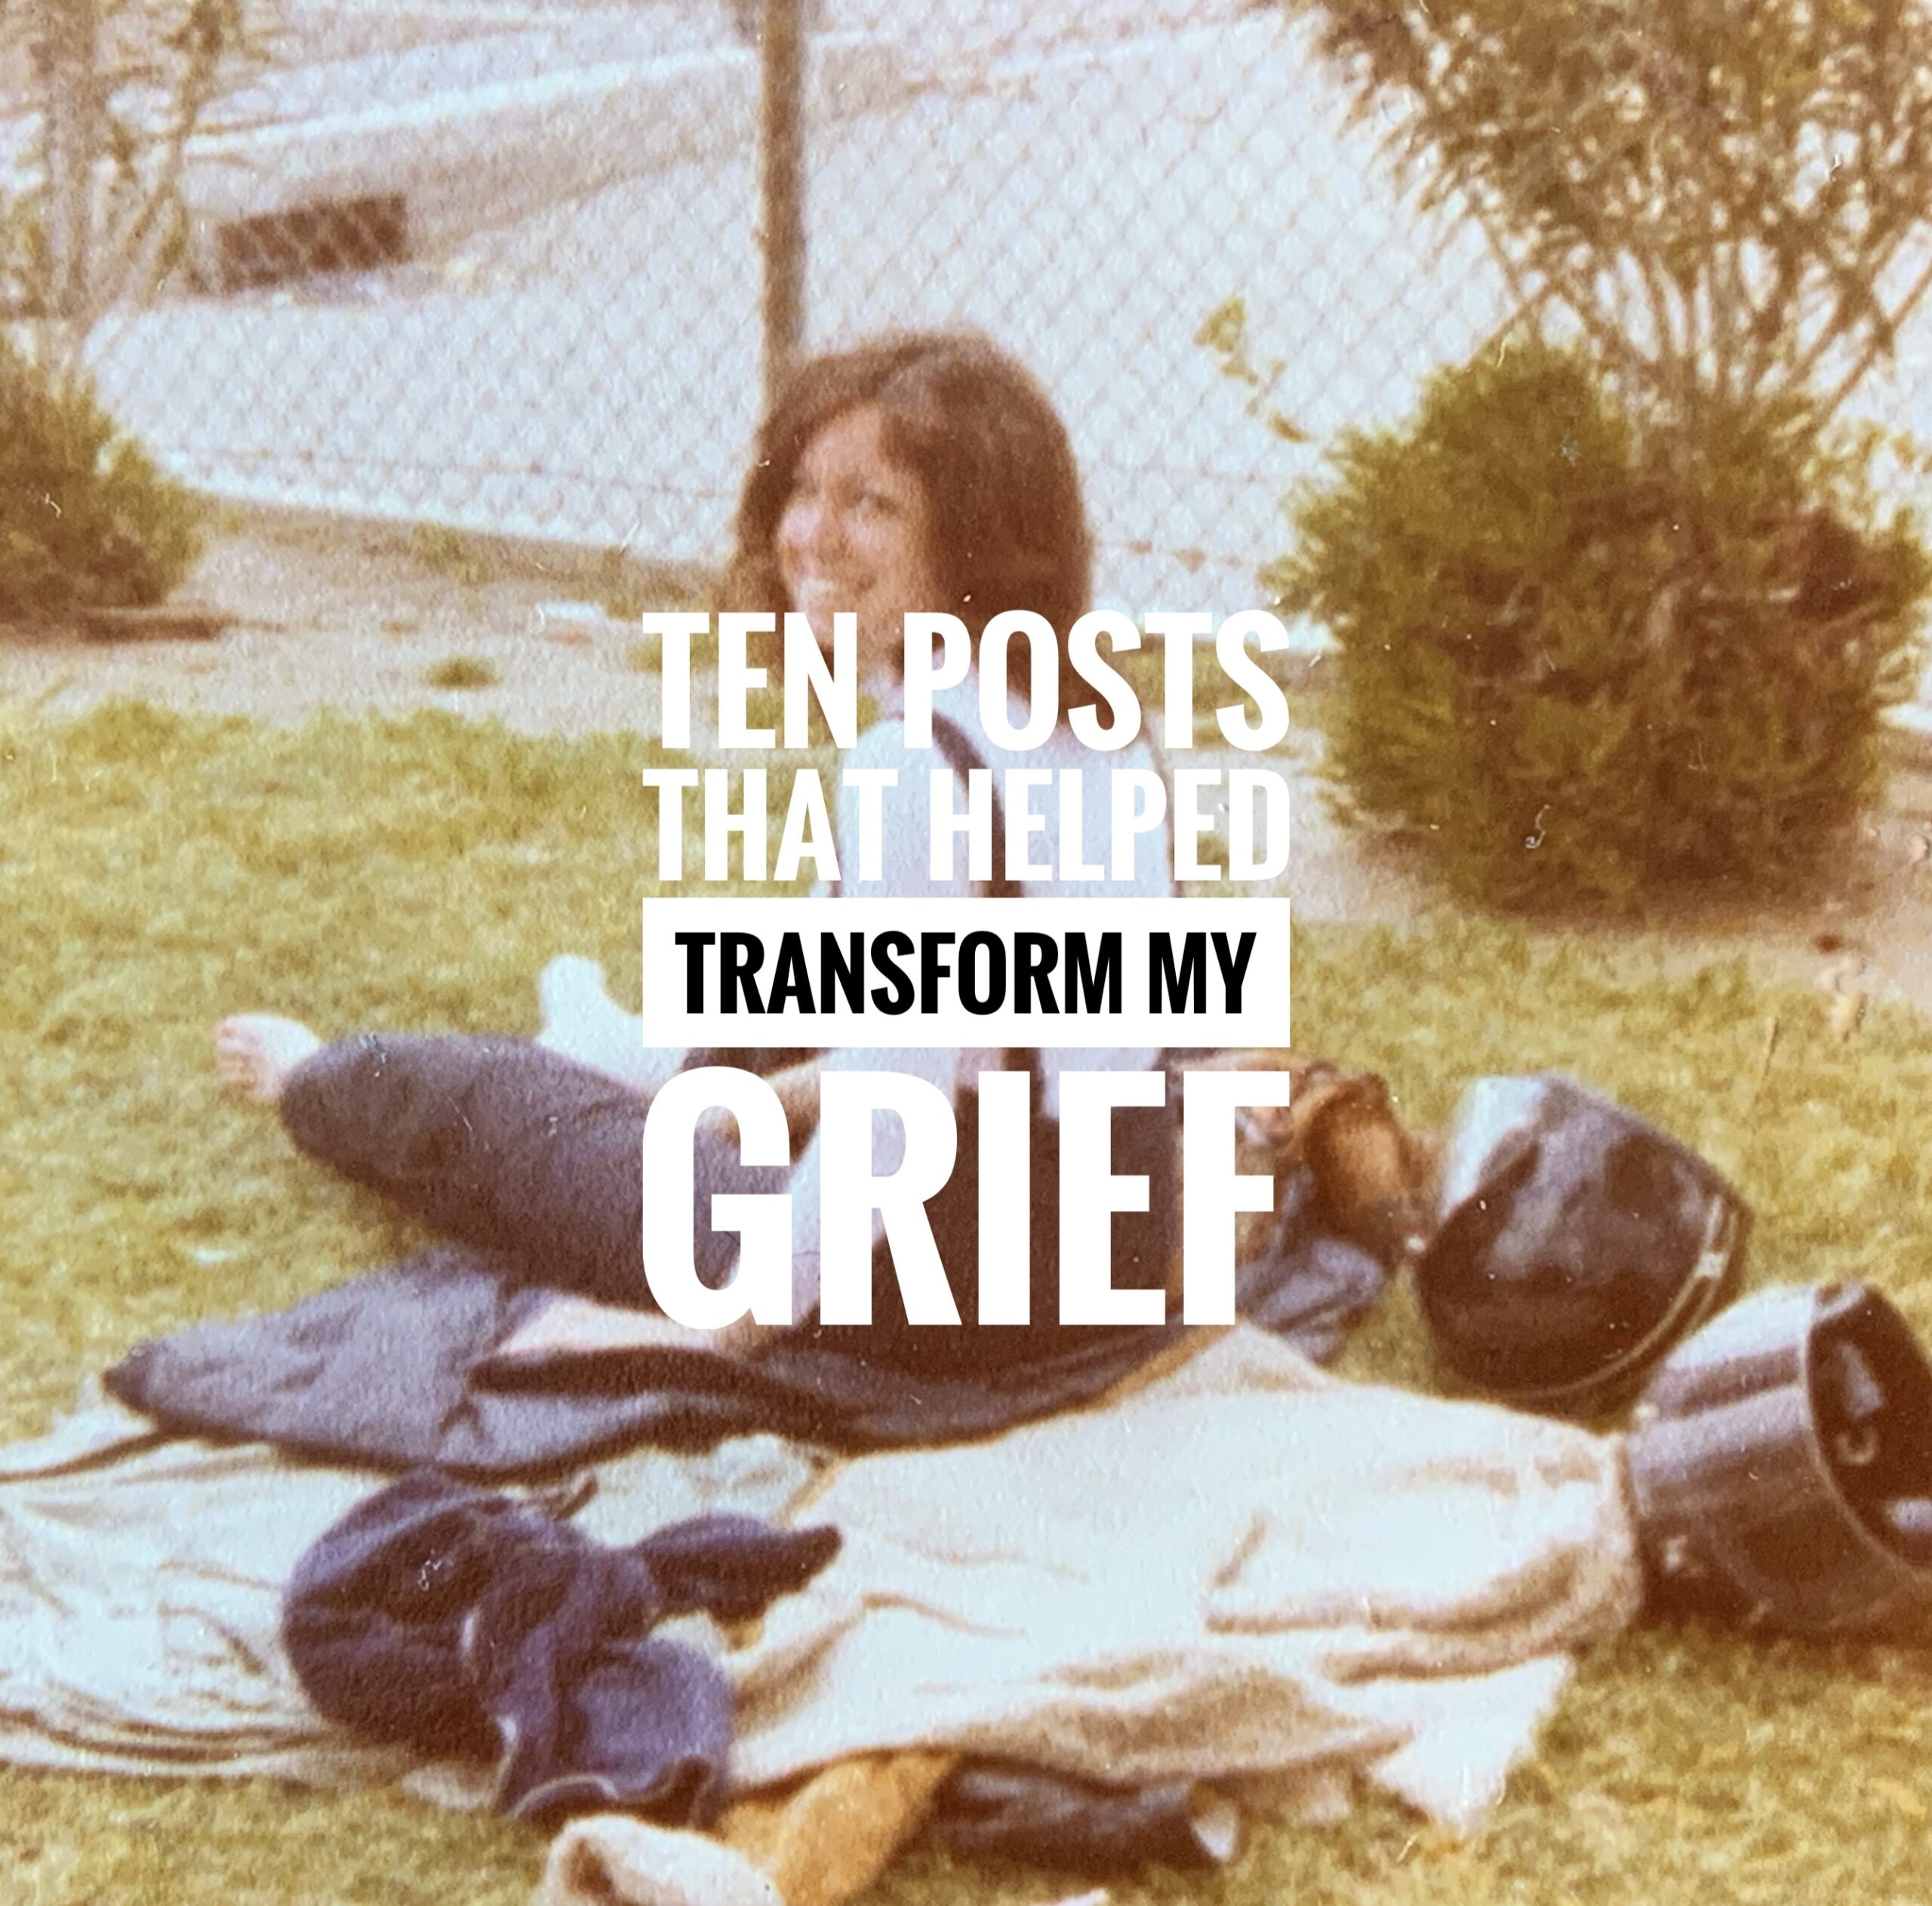 10 Posts That Helped Transform My Grief